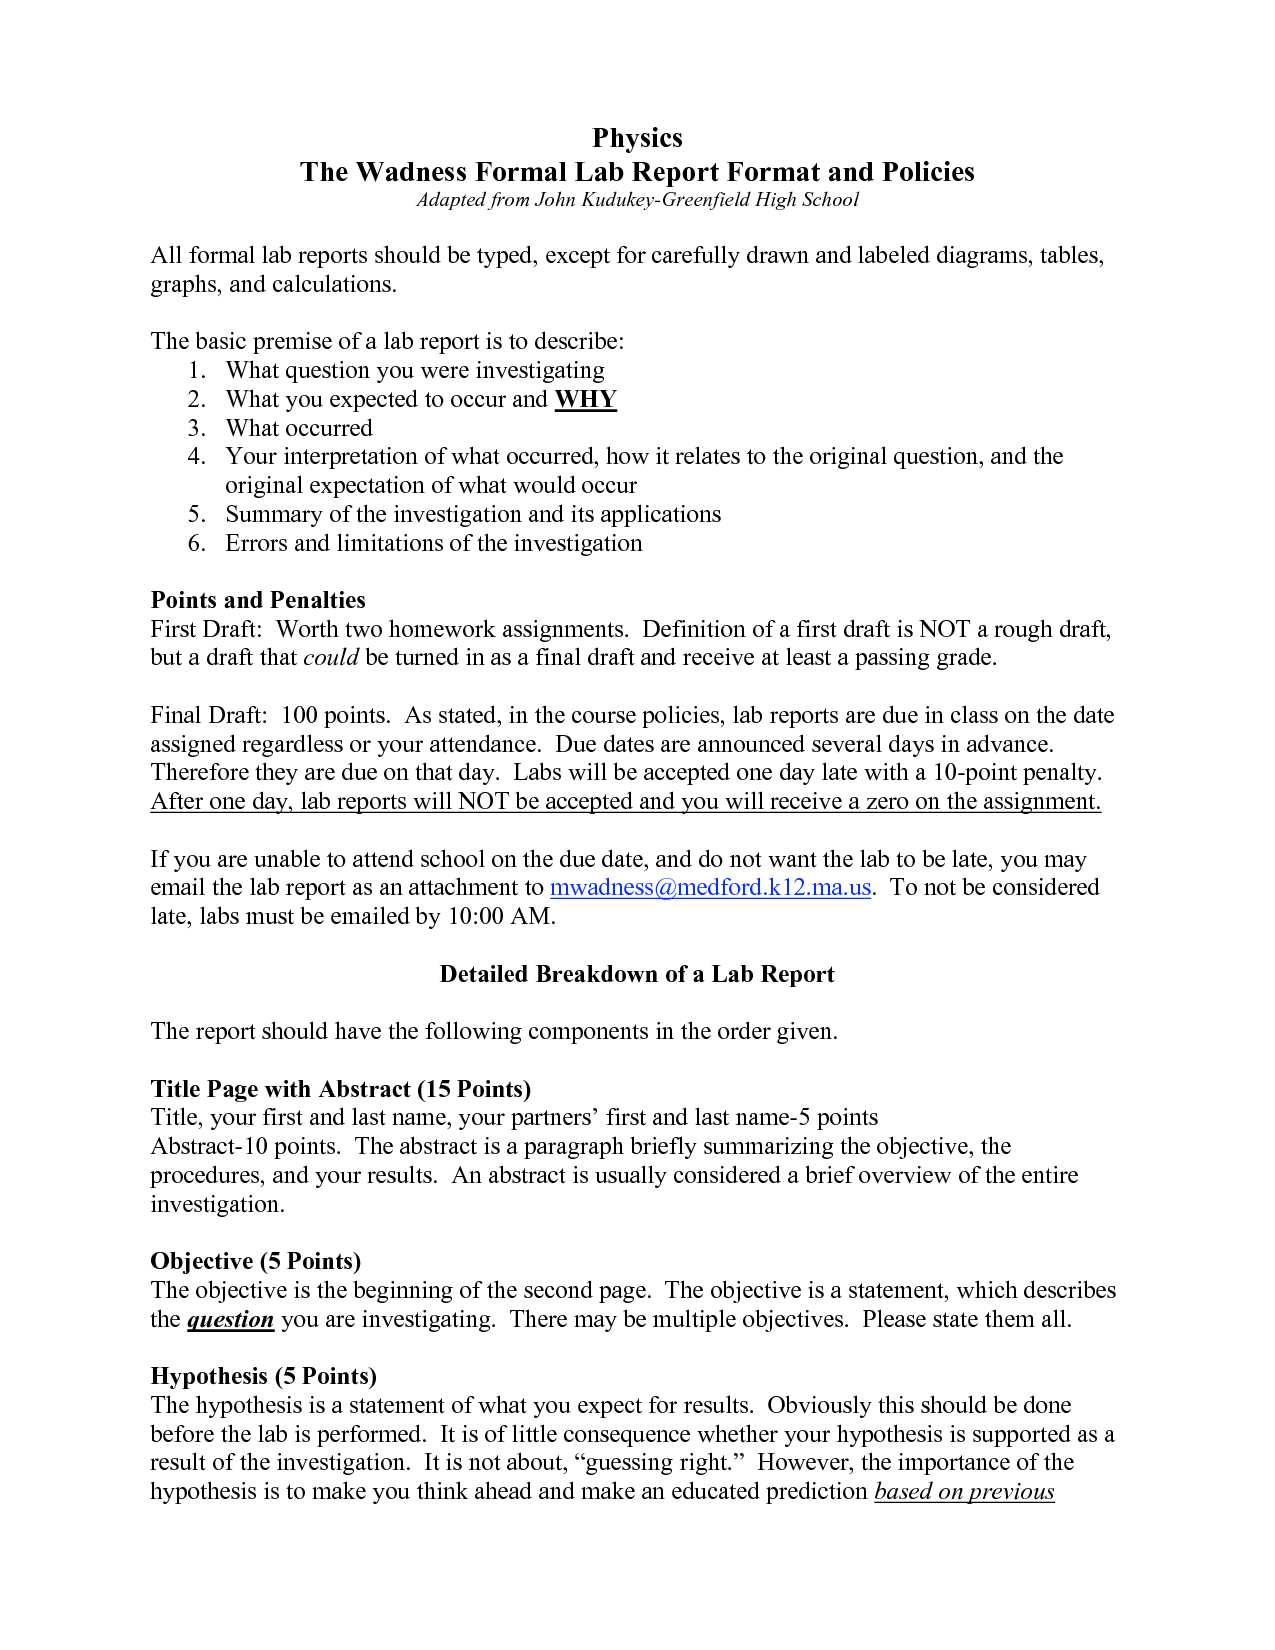 Formal Lab Report Template Physics : Biological Science Regarding Physics Lab Report Template